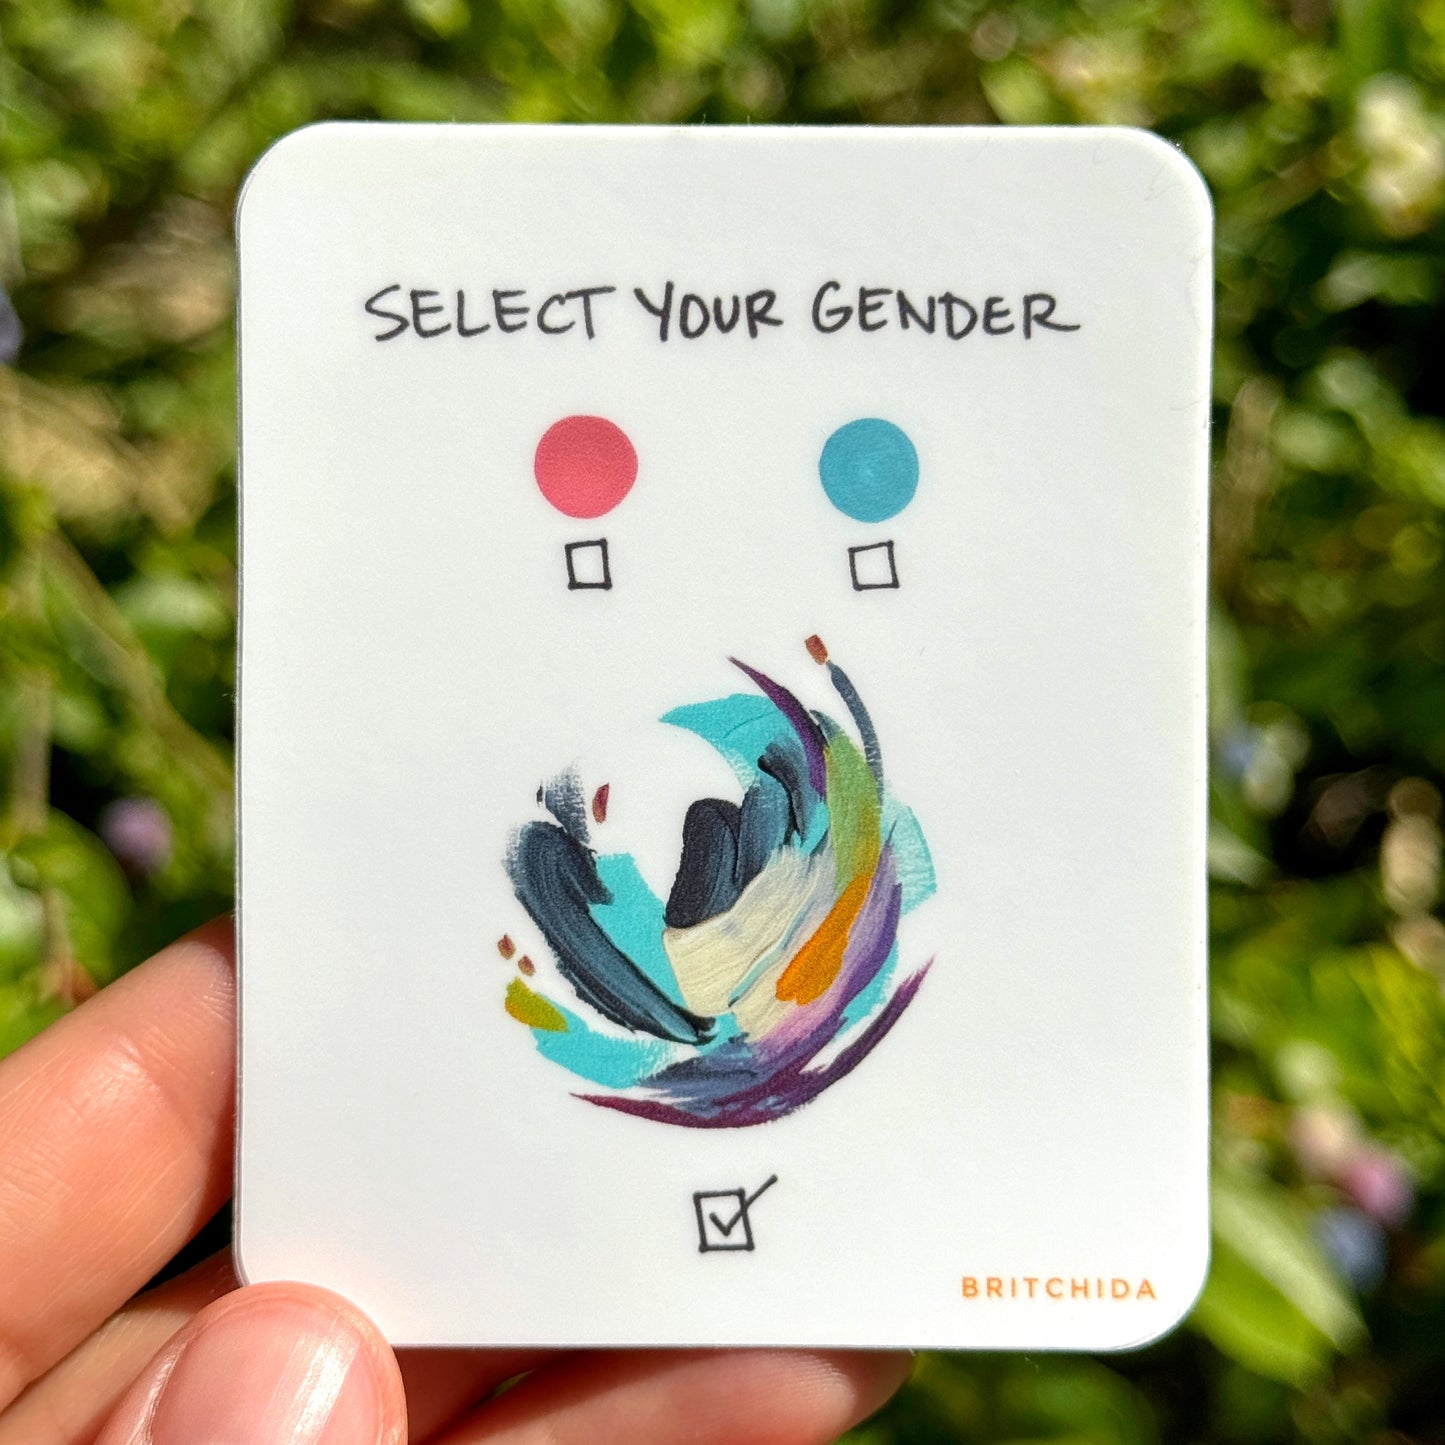 Select Your Gender Pack - (4 pieces)